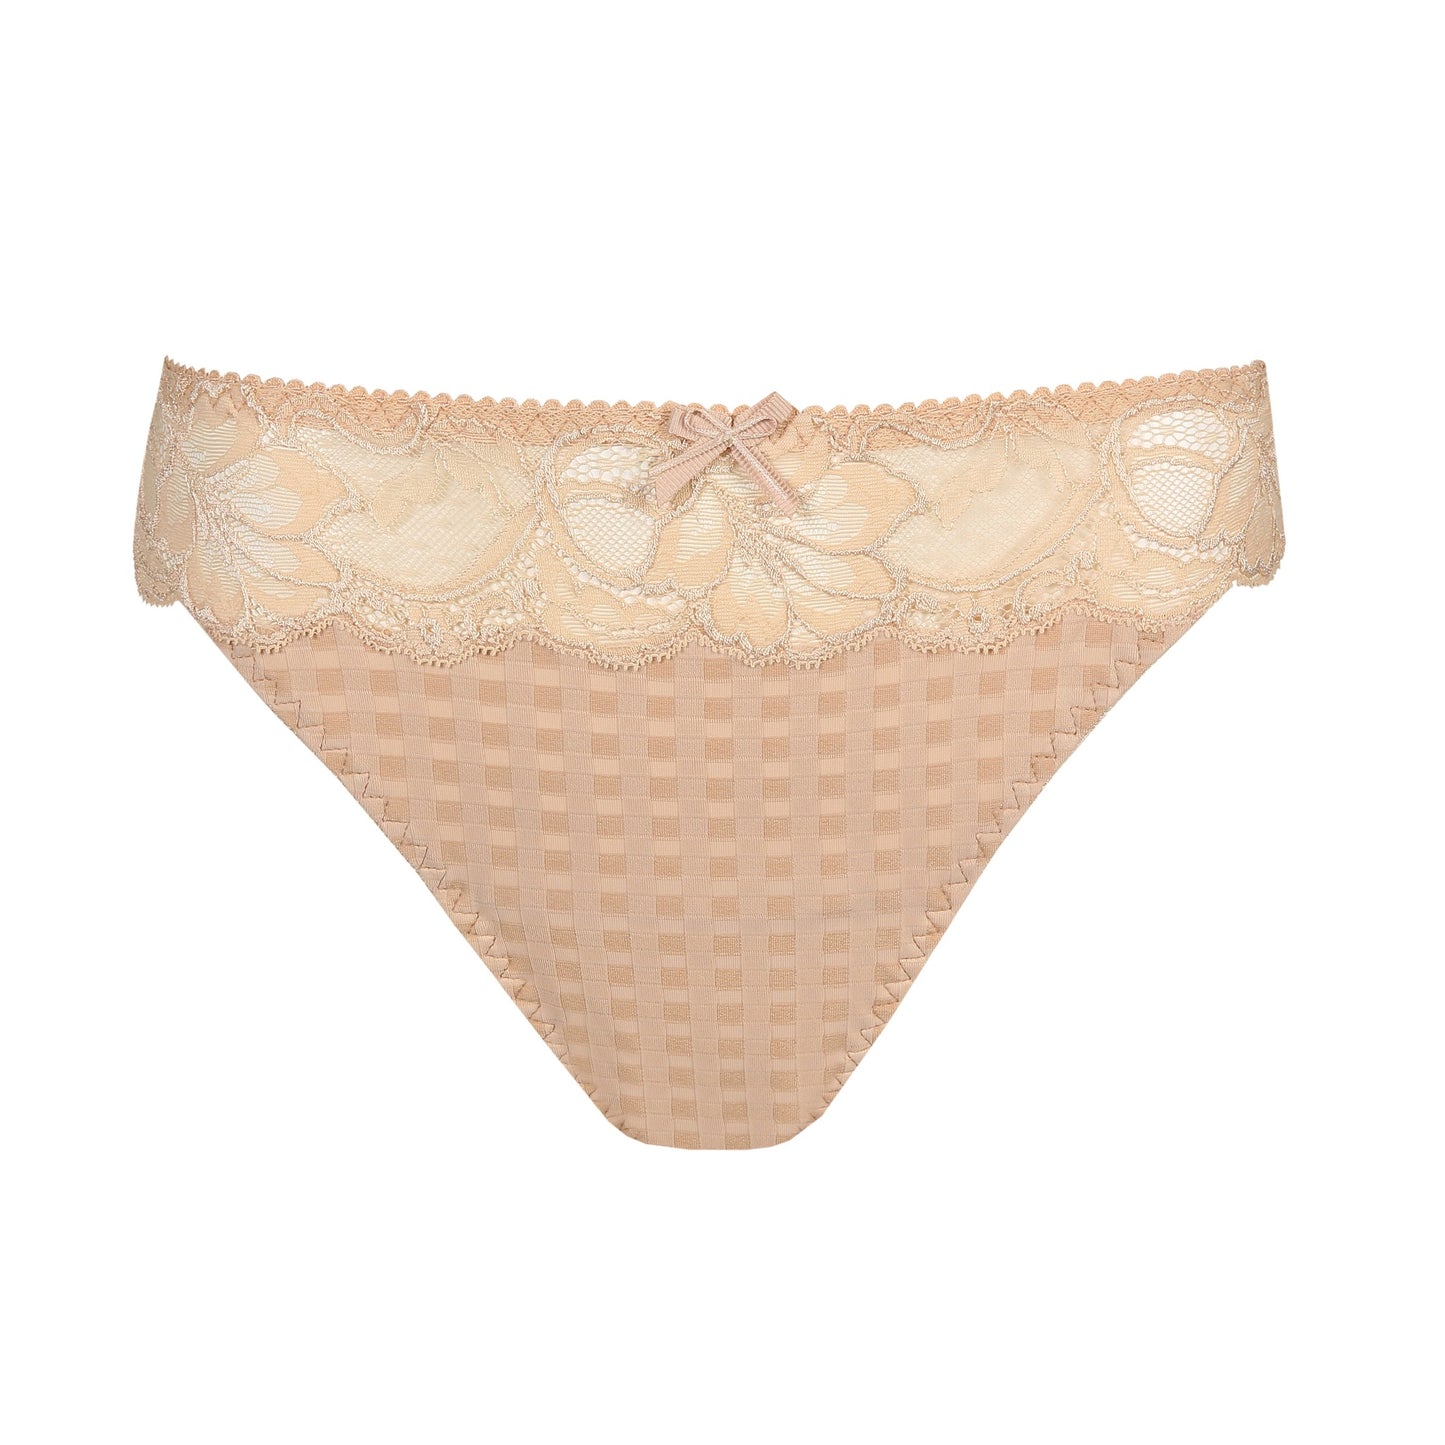 The Madison Thong in Caffe Latte by PrimaDonna.